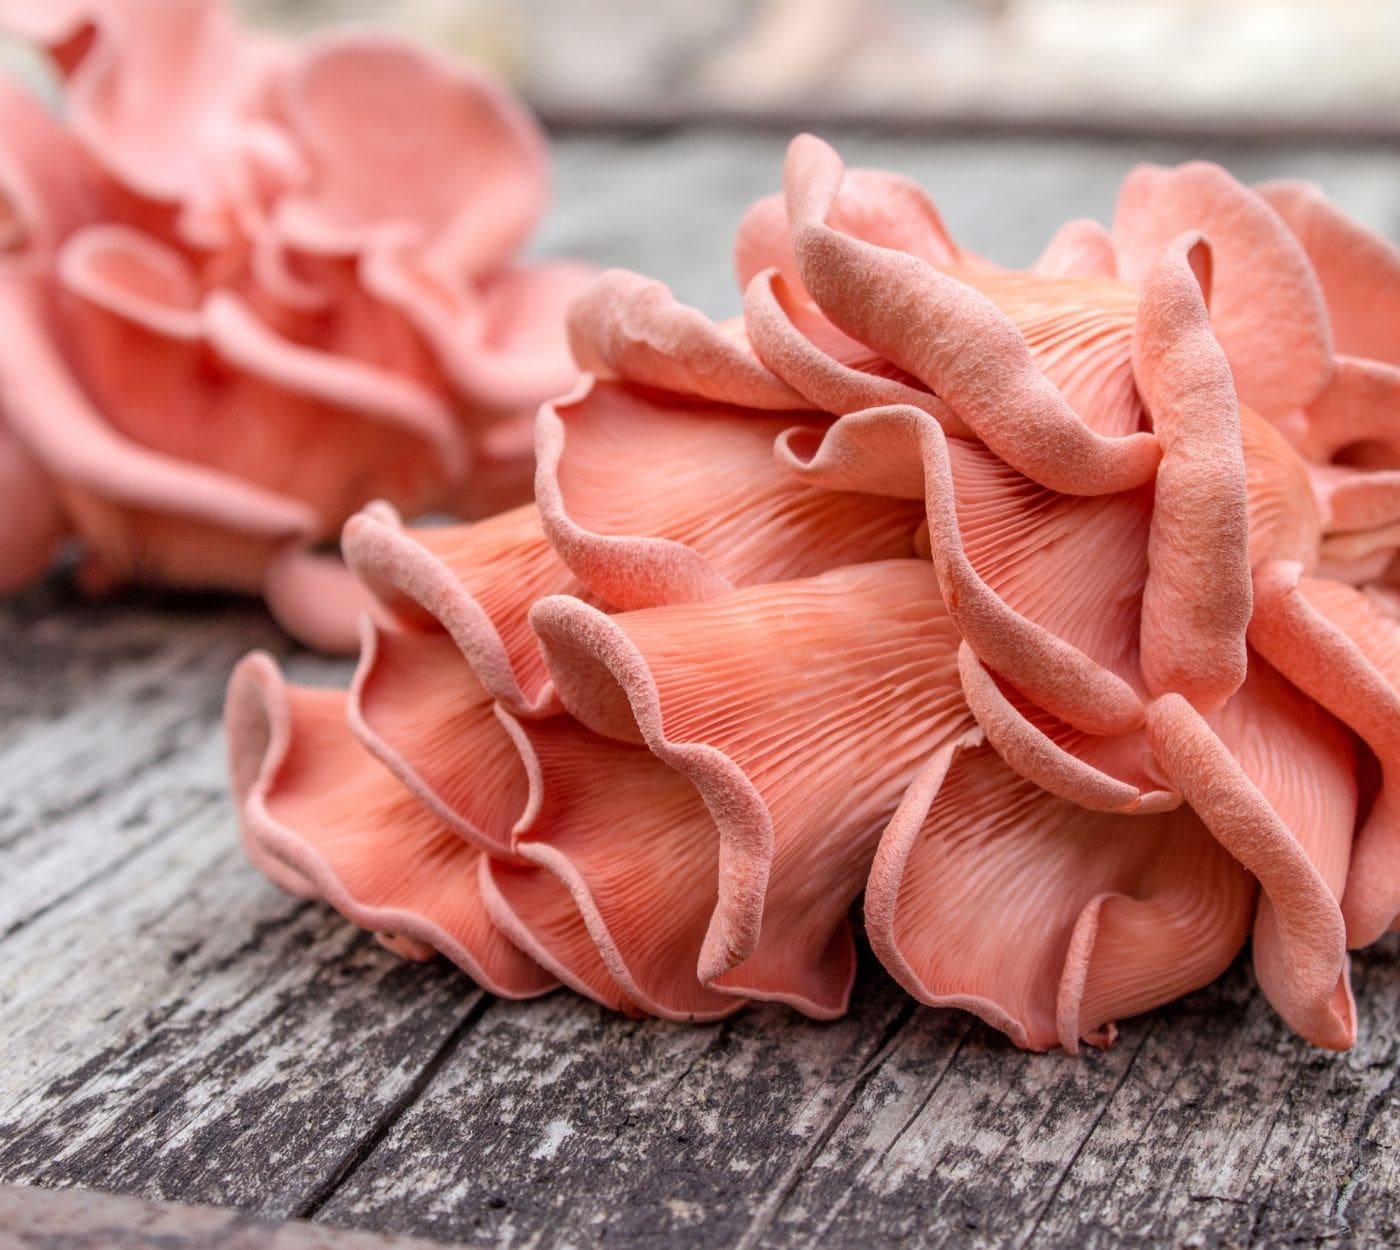 A cluster of pink oyster mushrooms sit on a faded wooden table.